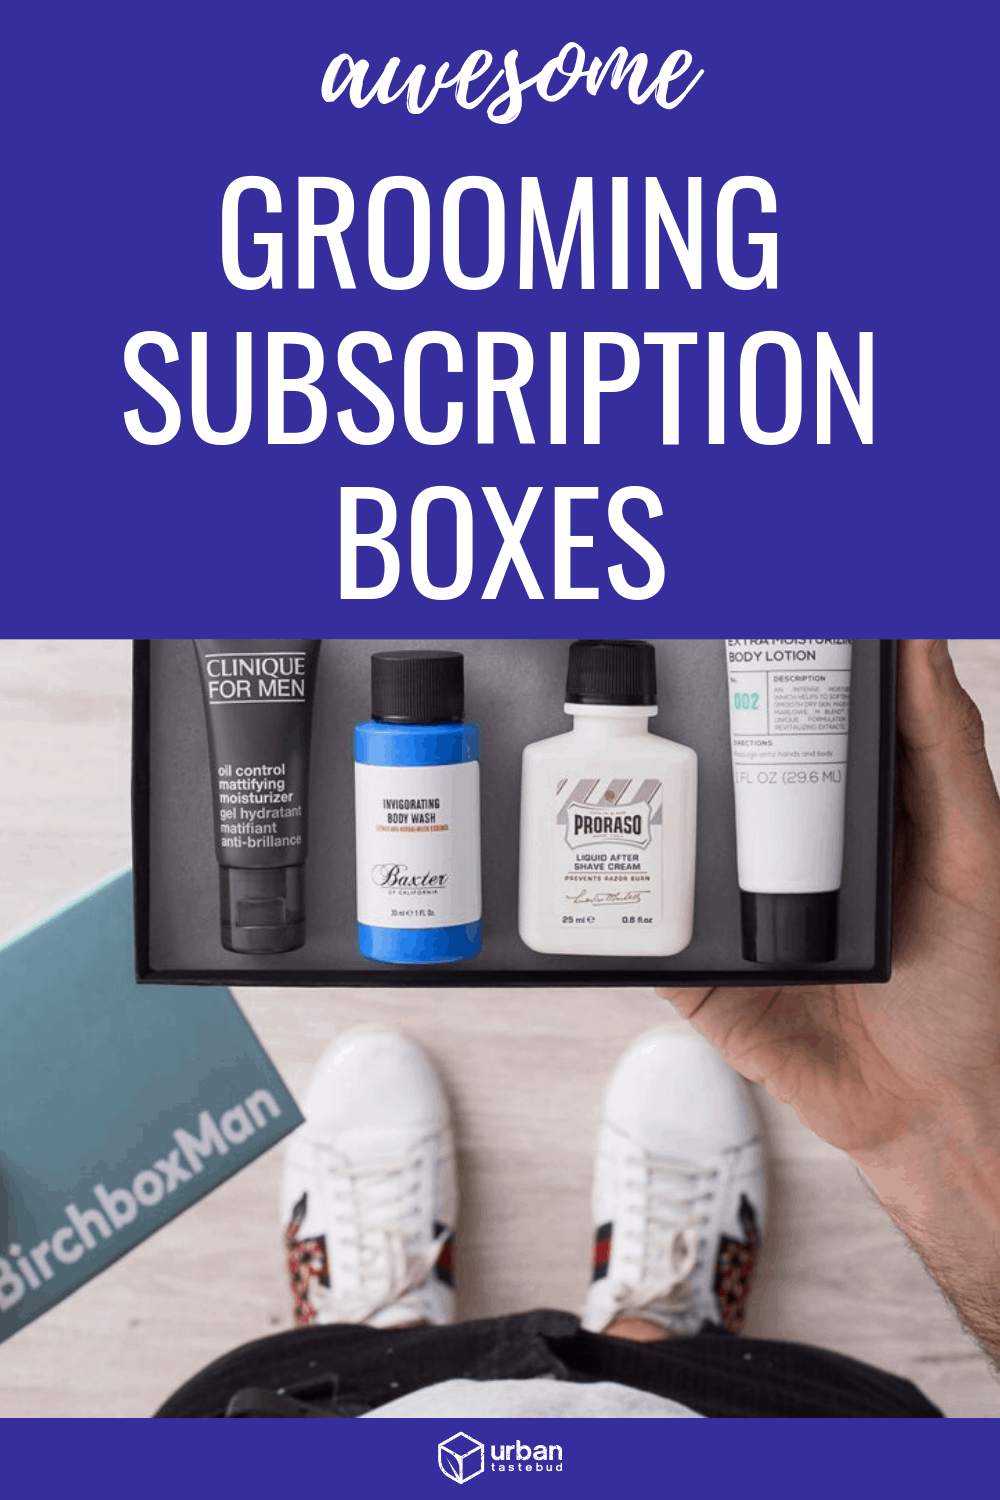 Grooming Subscription Boxes